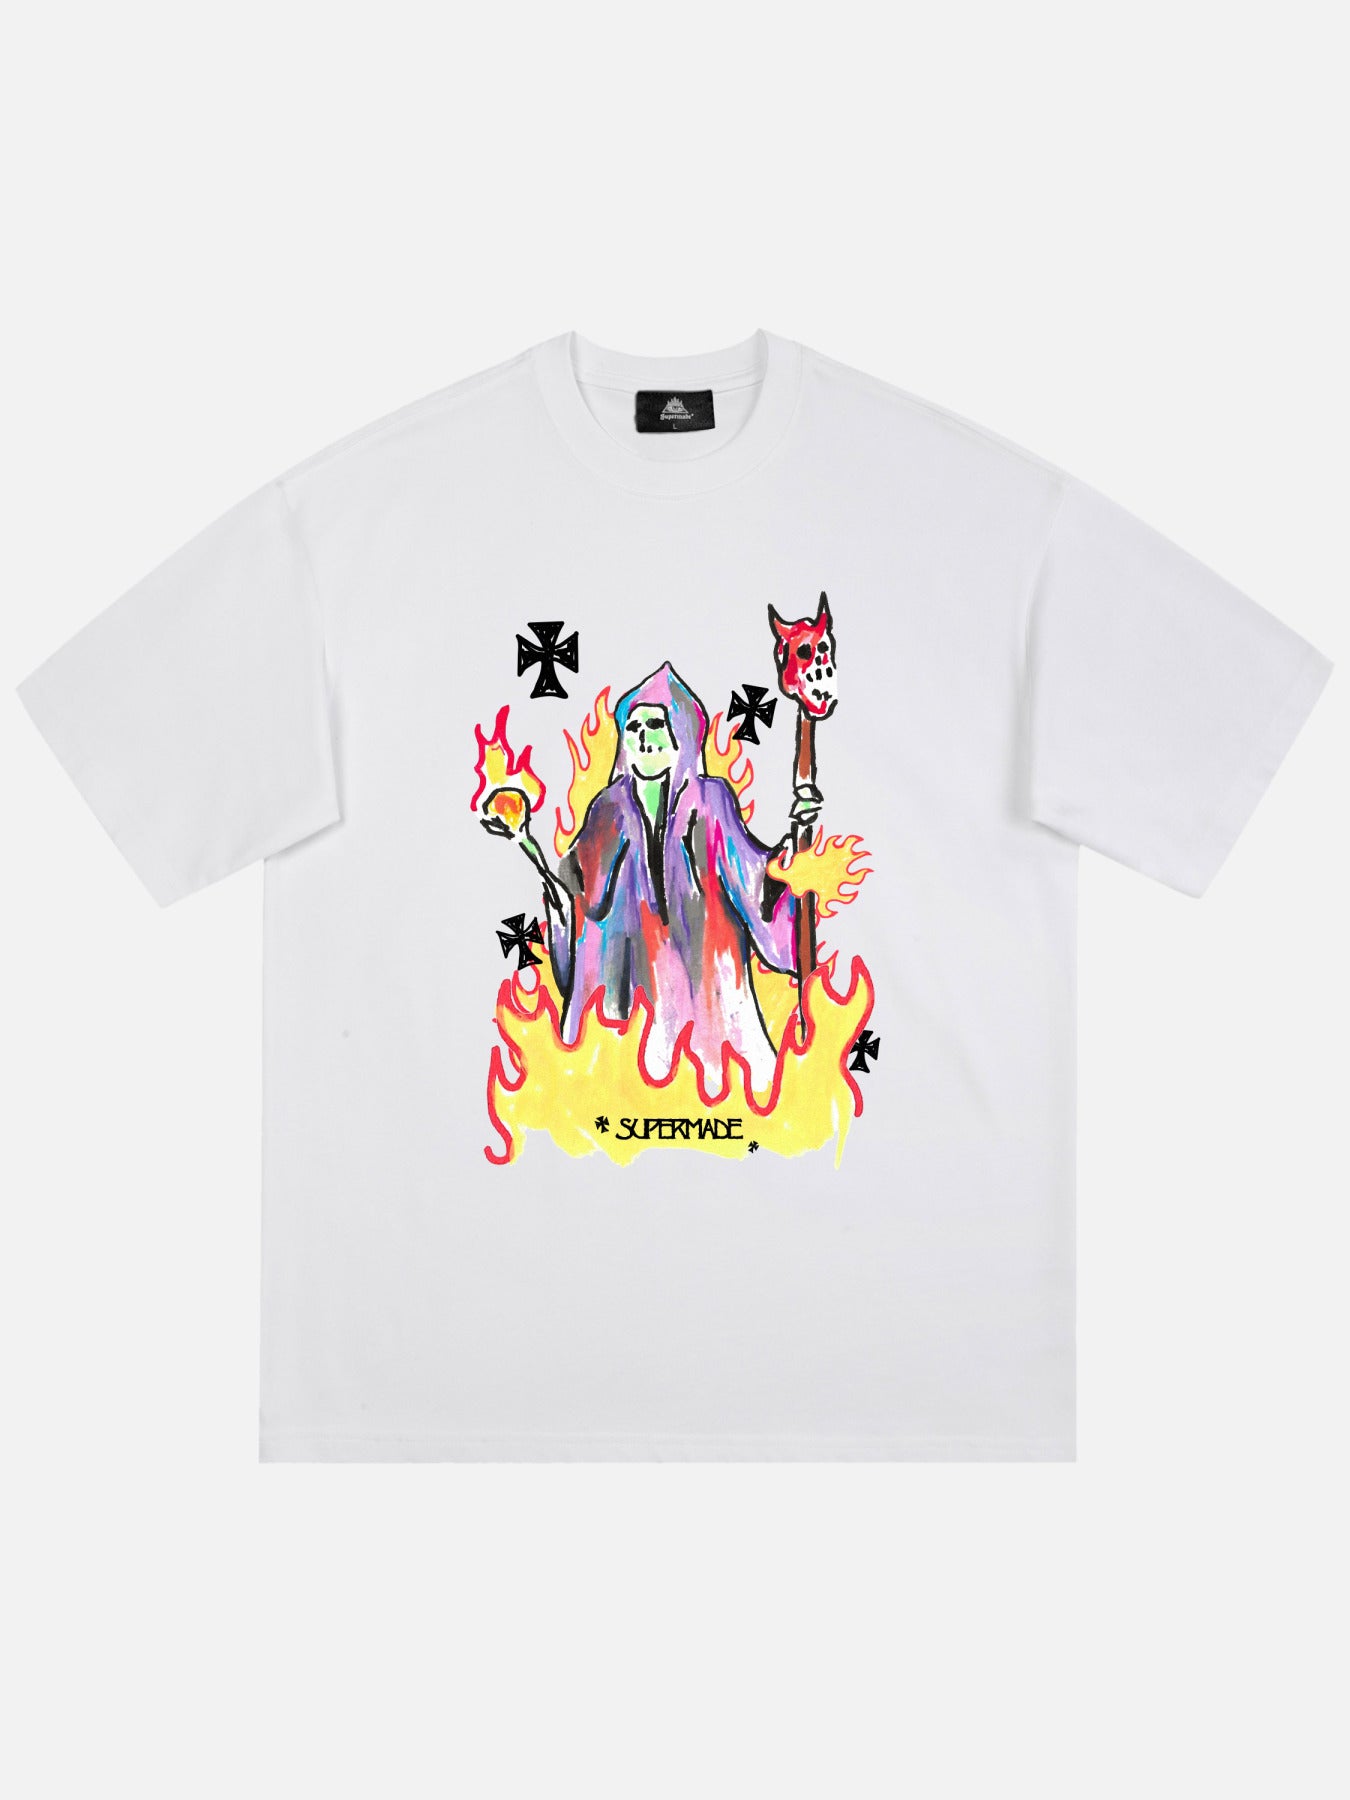 The Supermade Hand-painted Grim Reaper T-shirt